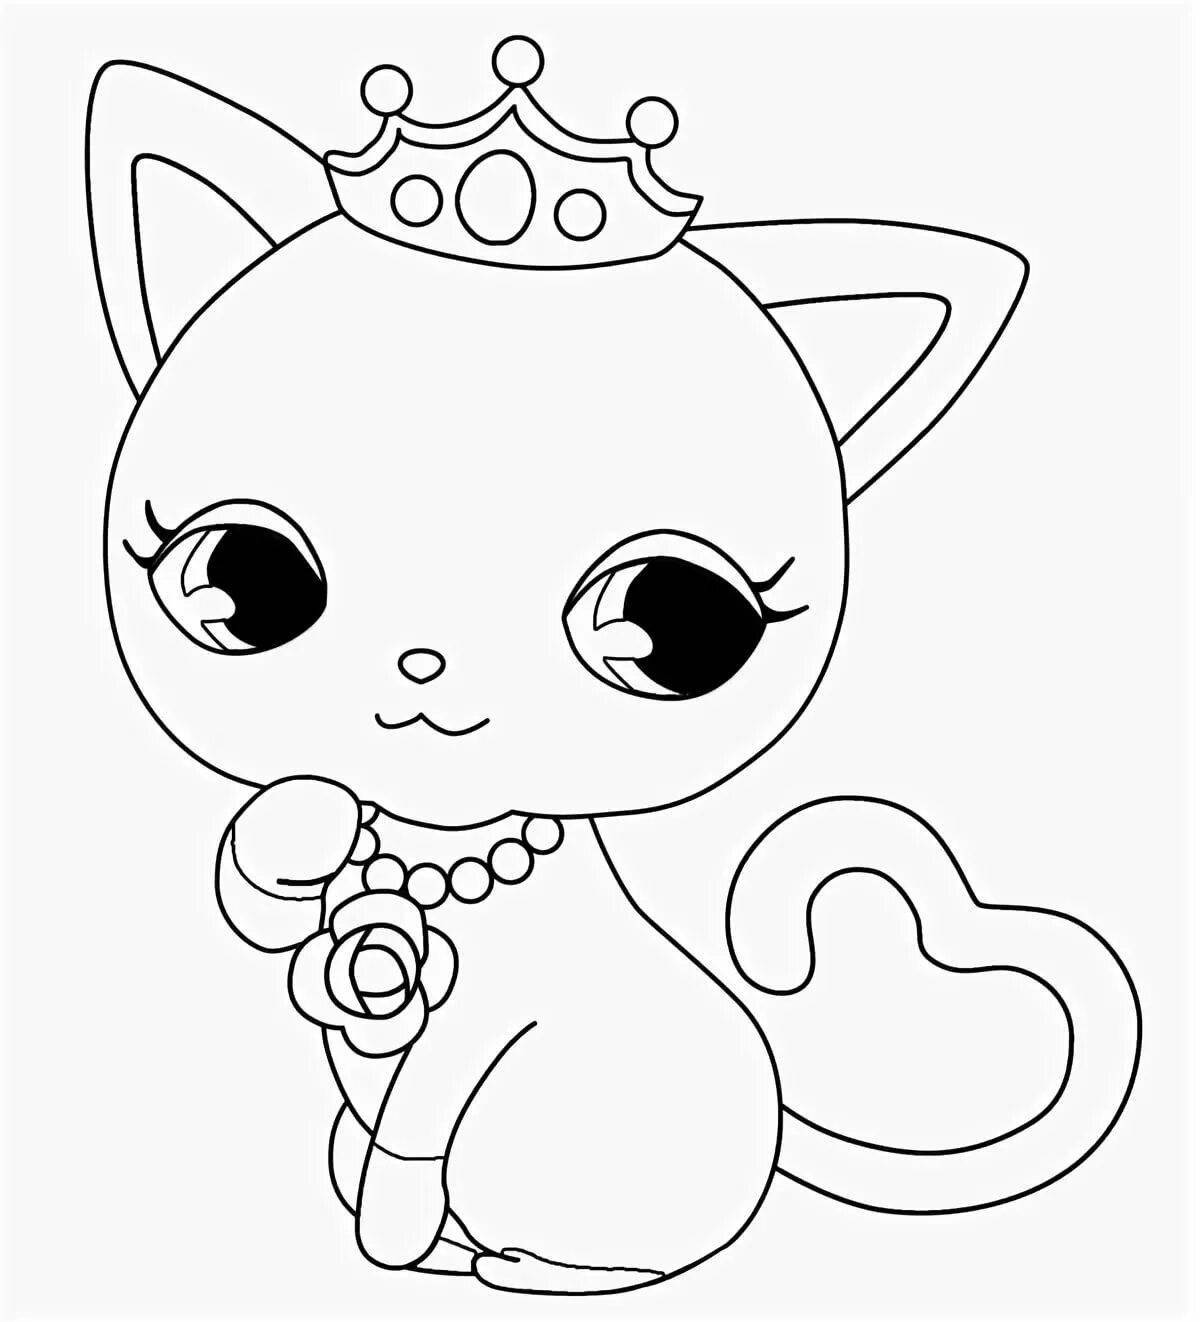 Fancy coloring for girls, cats and kittens